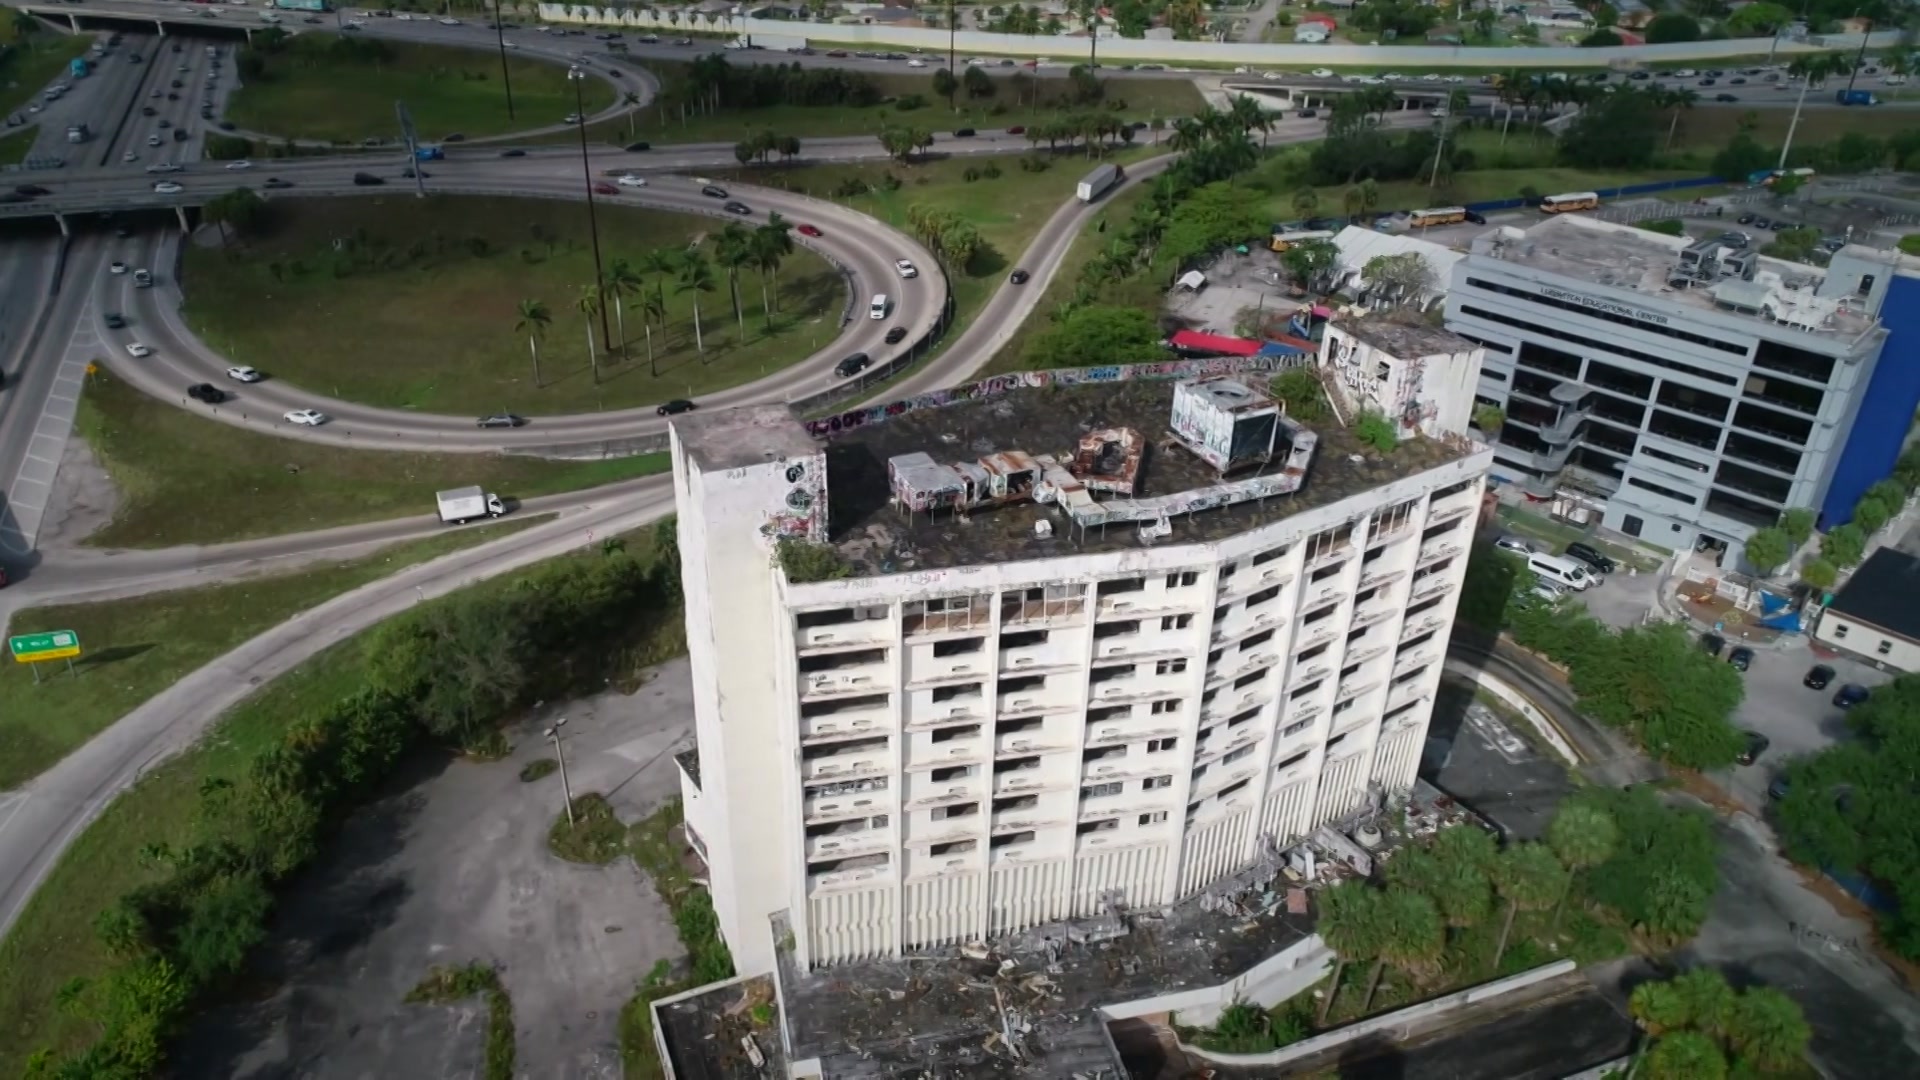 Graffiti-Riddled Abandoned Hospital Finally Going To Be Demolished In Miami Gardens